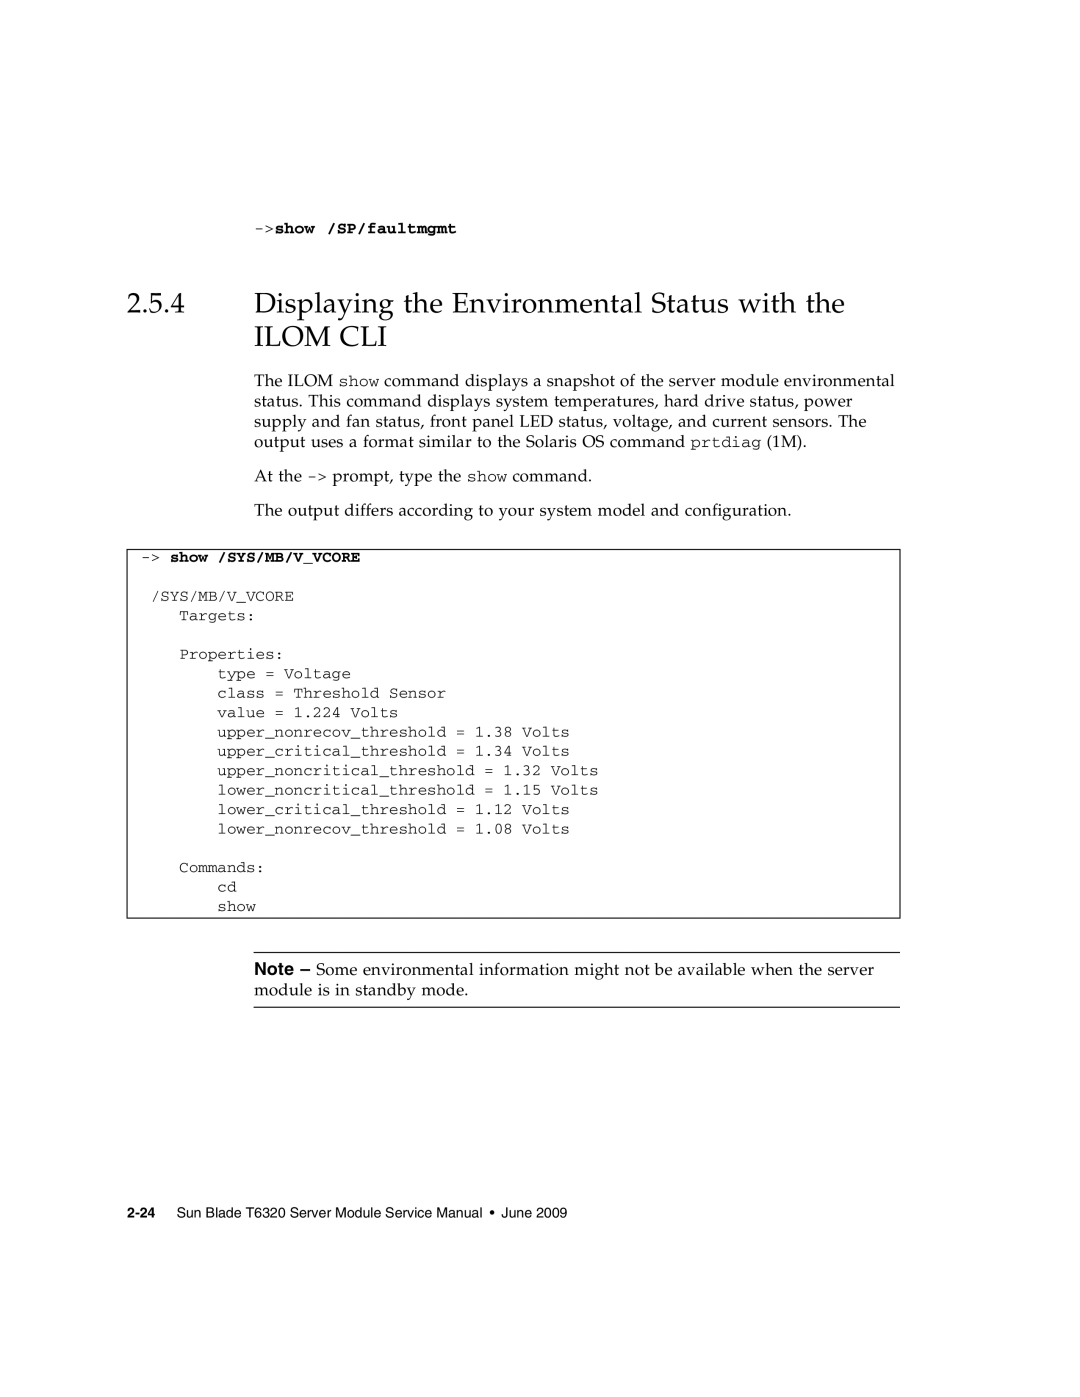 Sun Microsystems T6320 service manual Displaying the Environmental Status with the ILOM CLI, show /SP/faultmgmt 